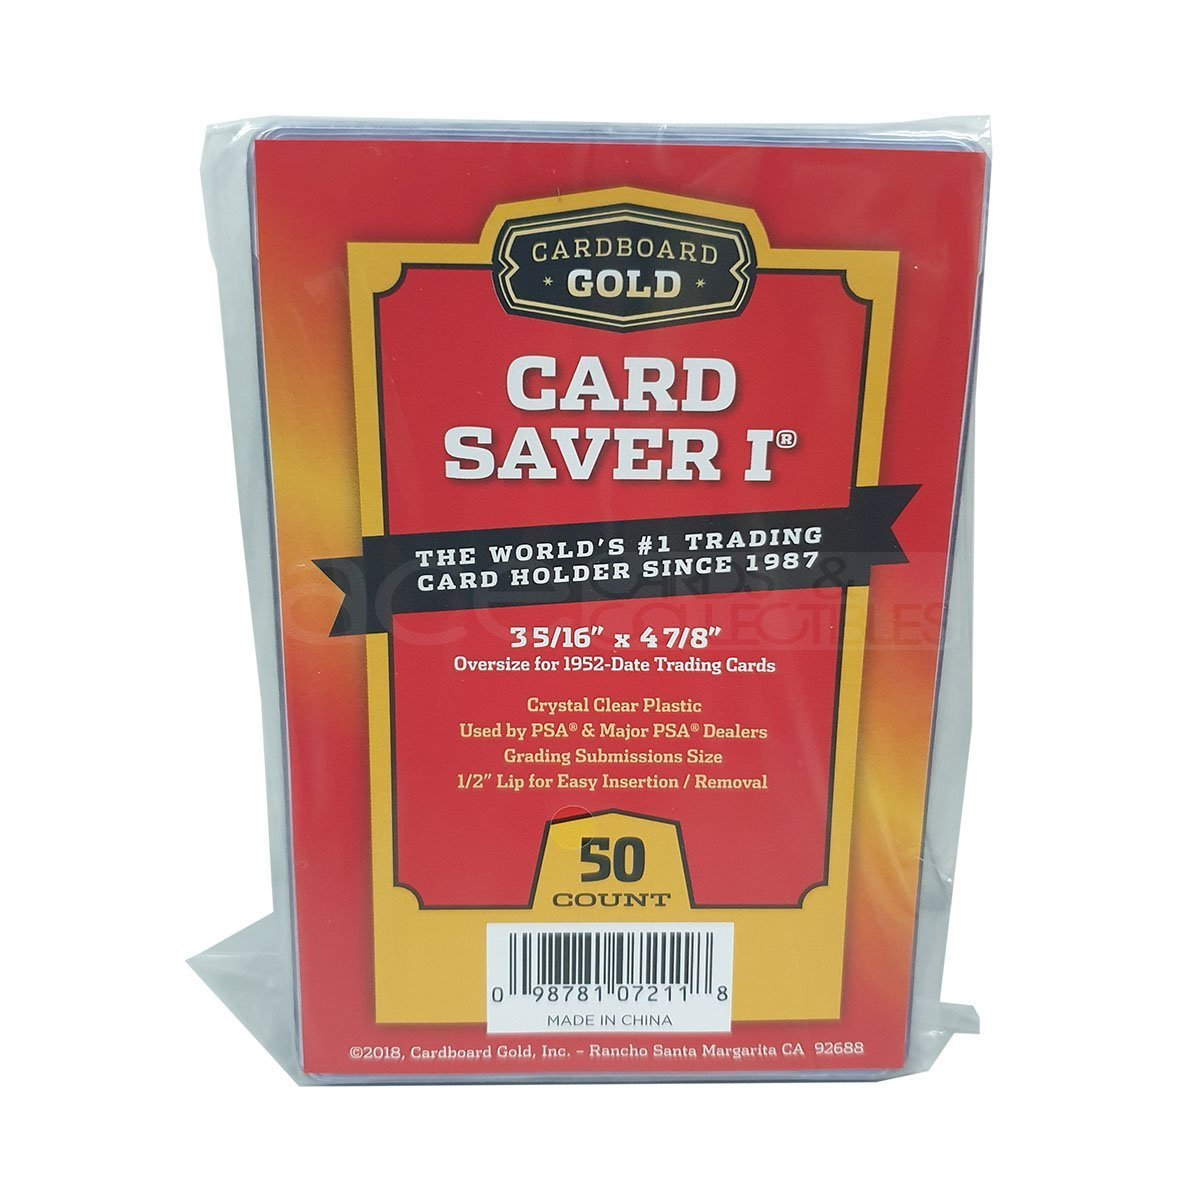 Cardboard Gold "Card Saver 1" Semi-Rigid Card Holder [ Pack / Box ]-One Pack-Clear 50pcs-Cardboard Gold-Ace Cards & Collectibles